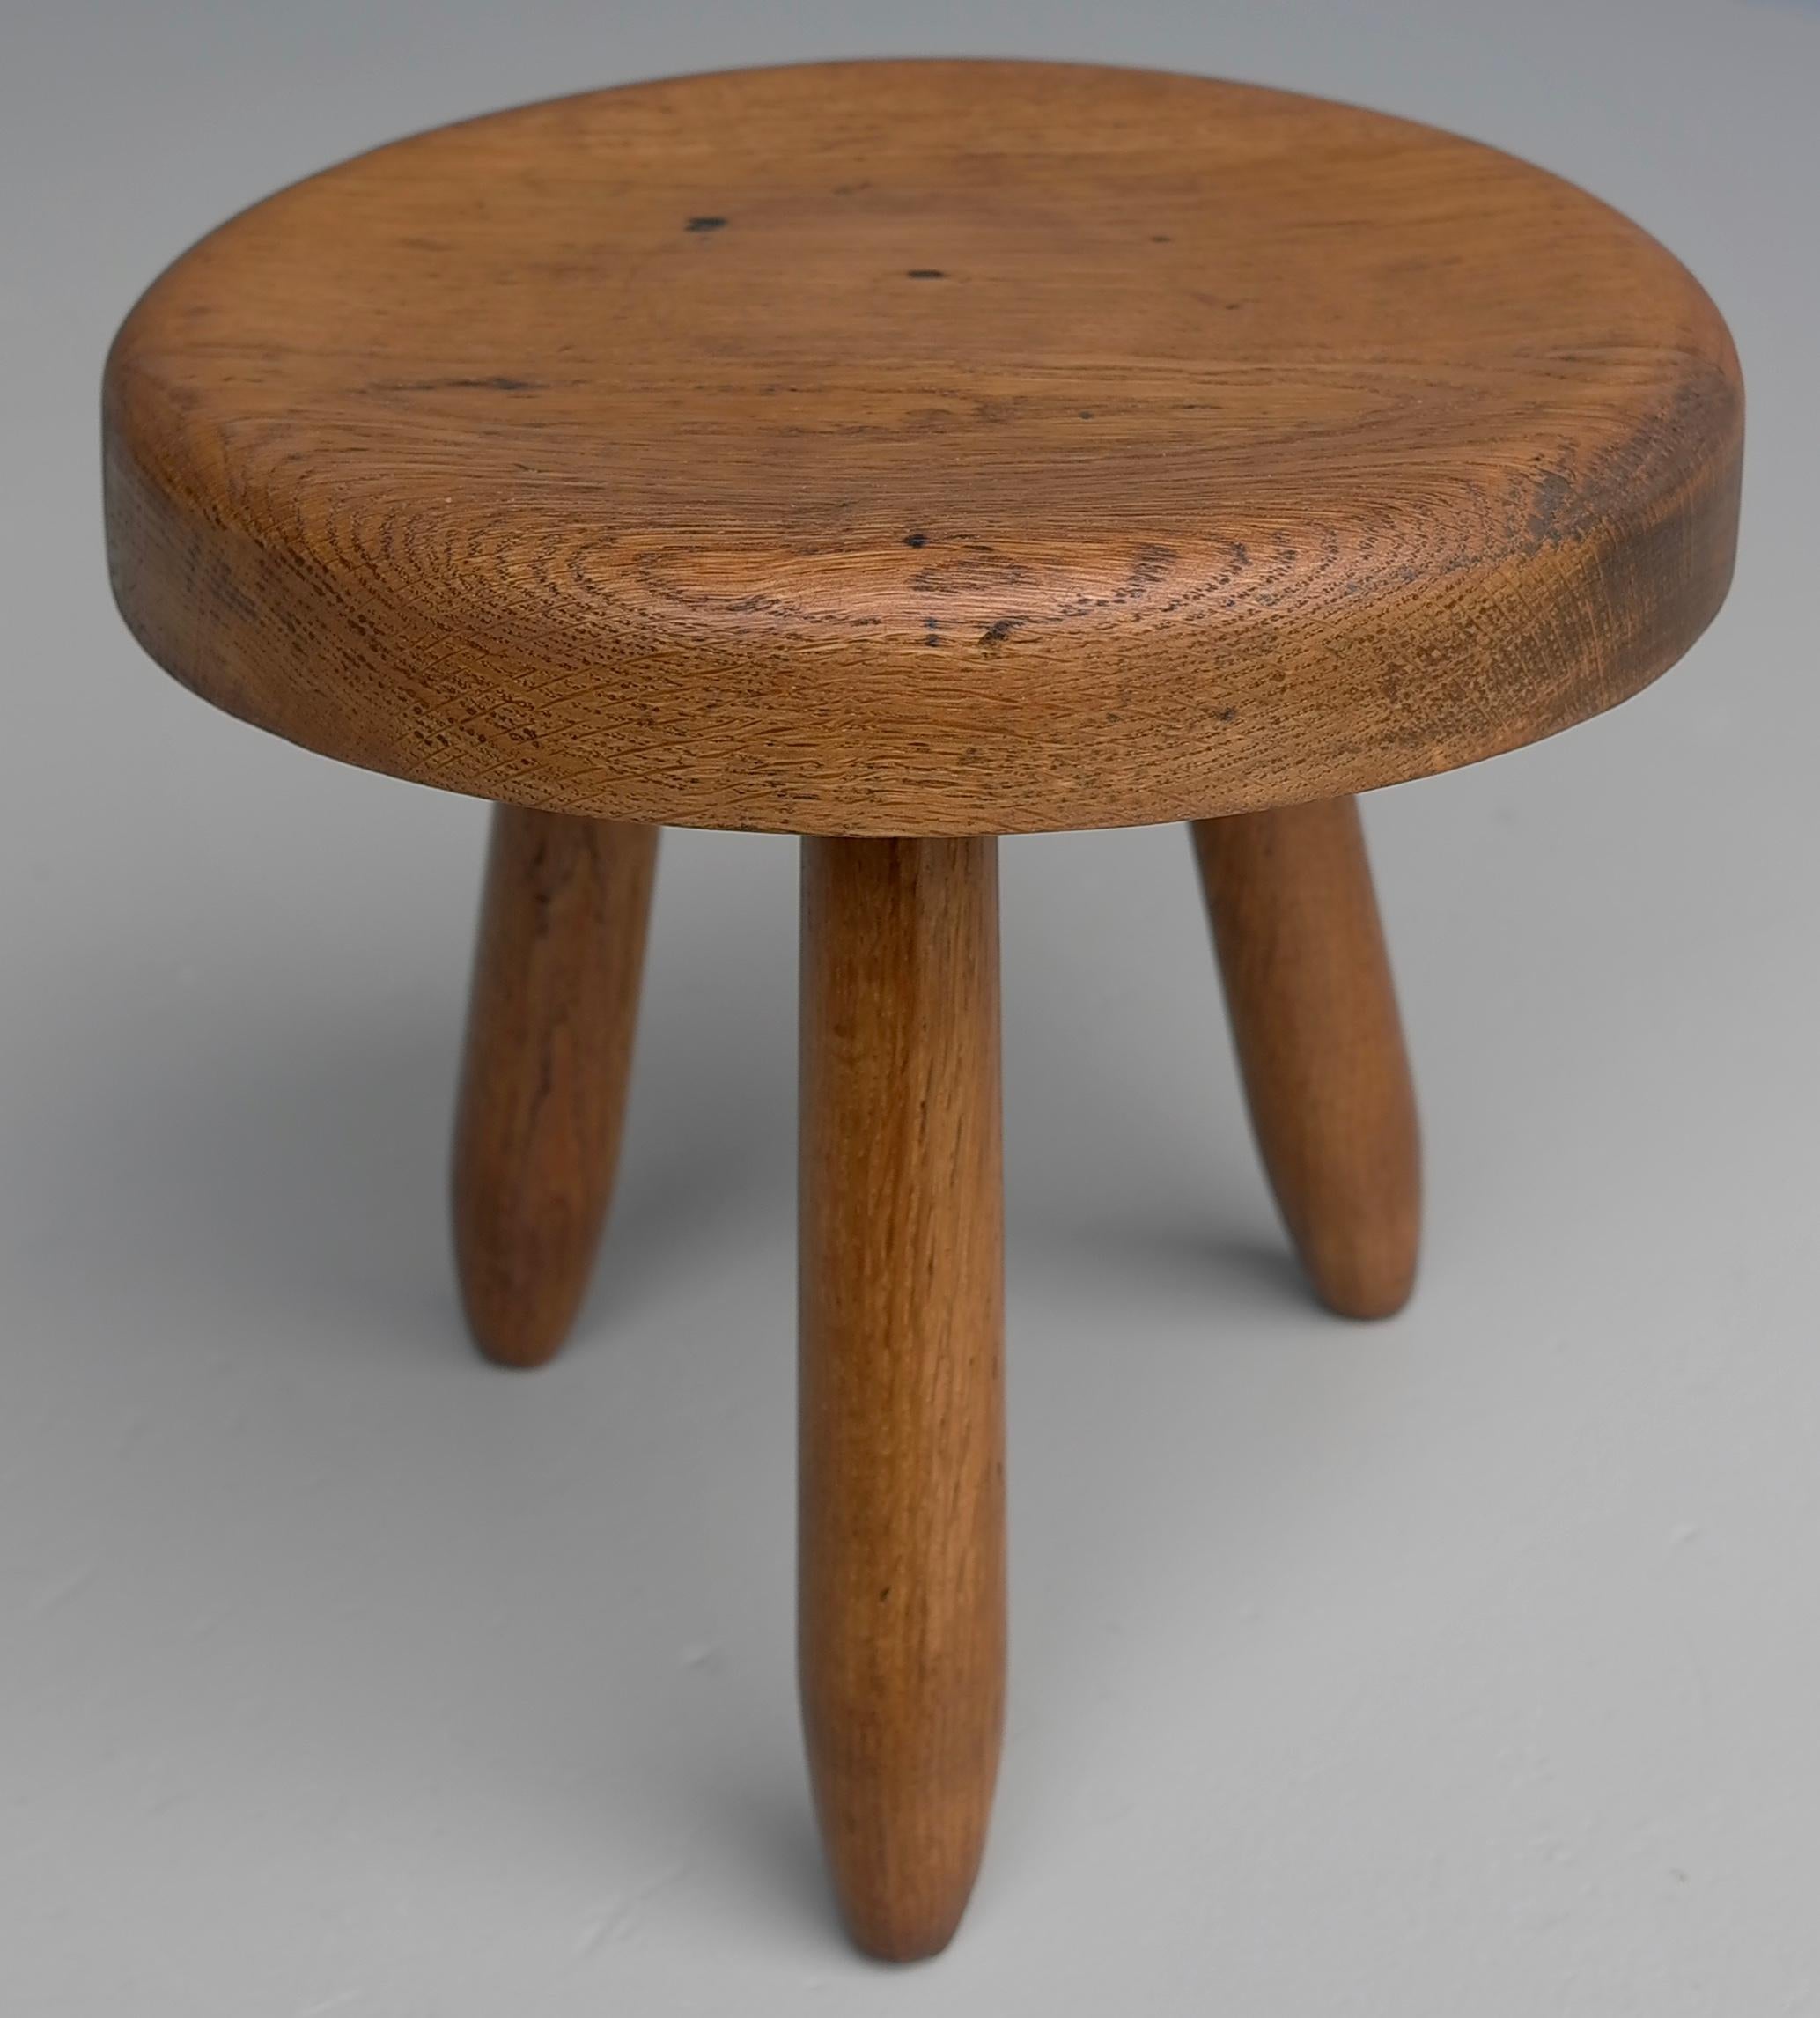 Solid Oak ' Berger' Stool in Style of Charlotte Perriand, France, 1950's For Sale 6